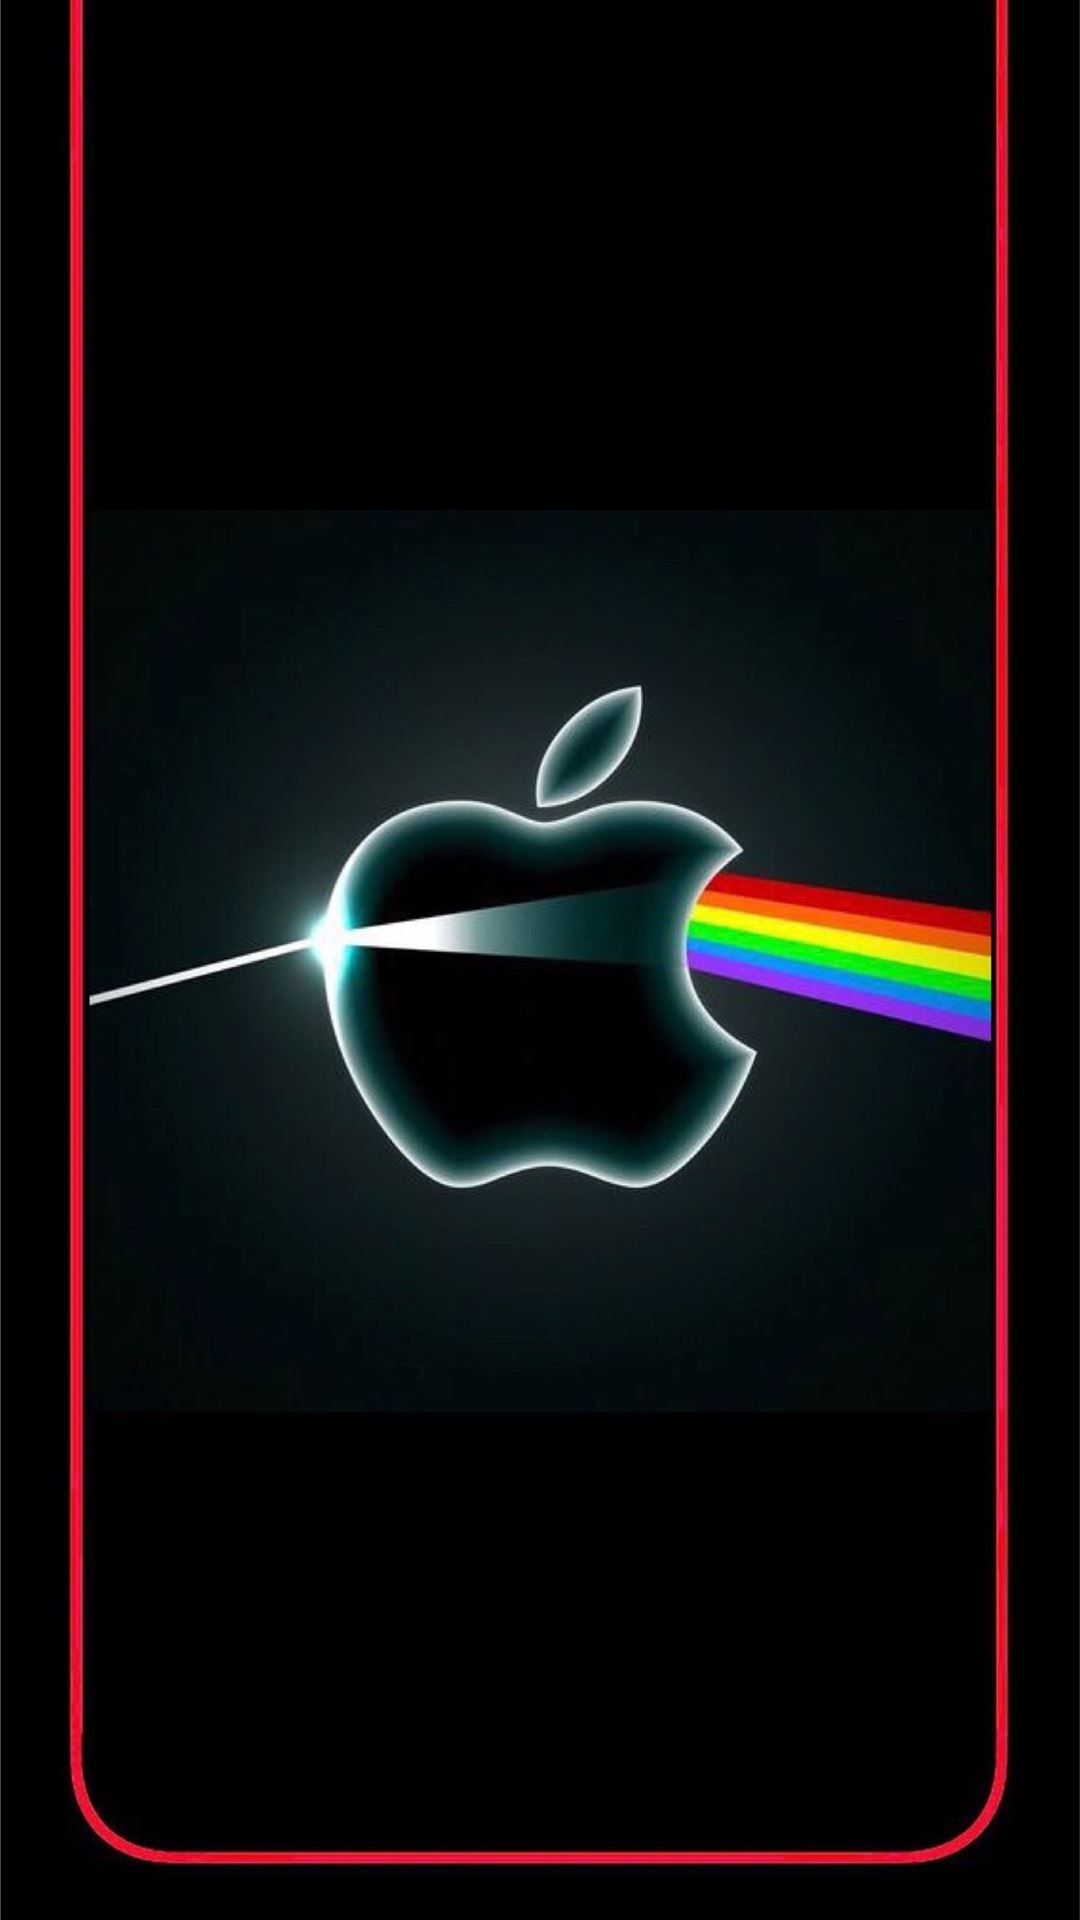 Apple logo rainbow 3 iPhone Wallpapers Free Download